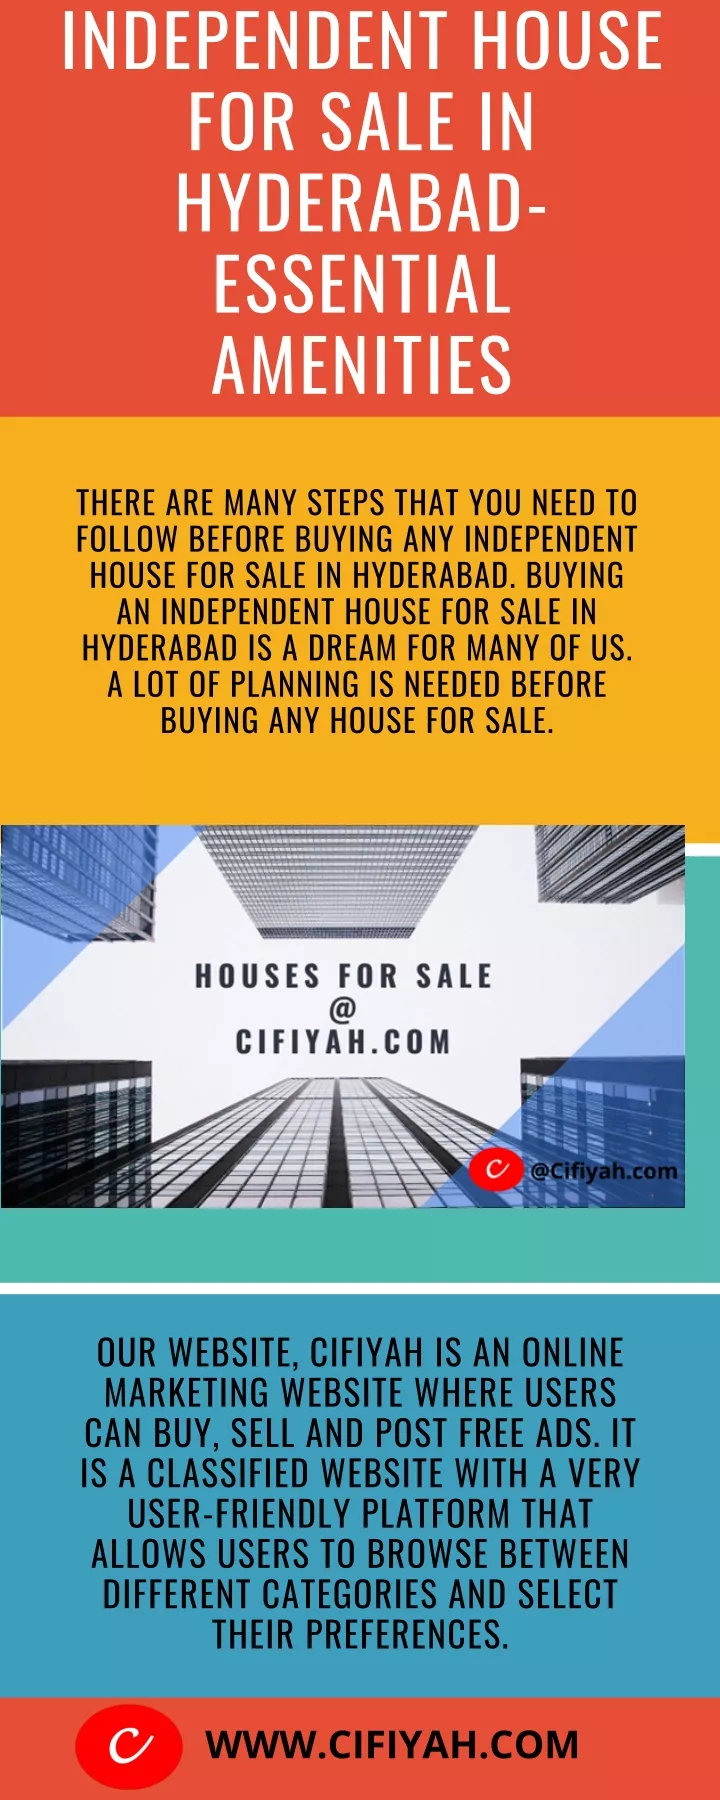 independent house for sale in hyderabad essential